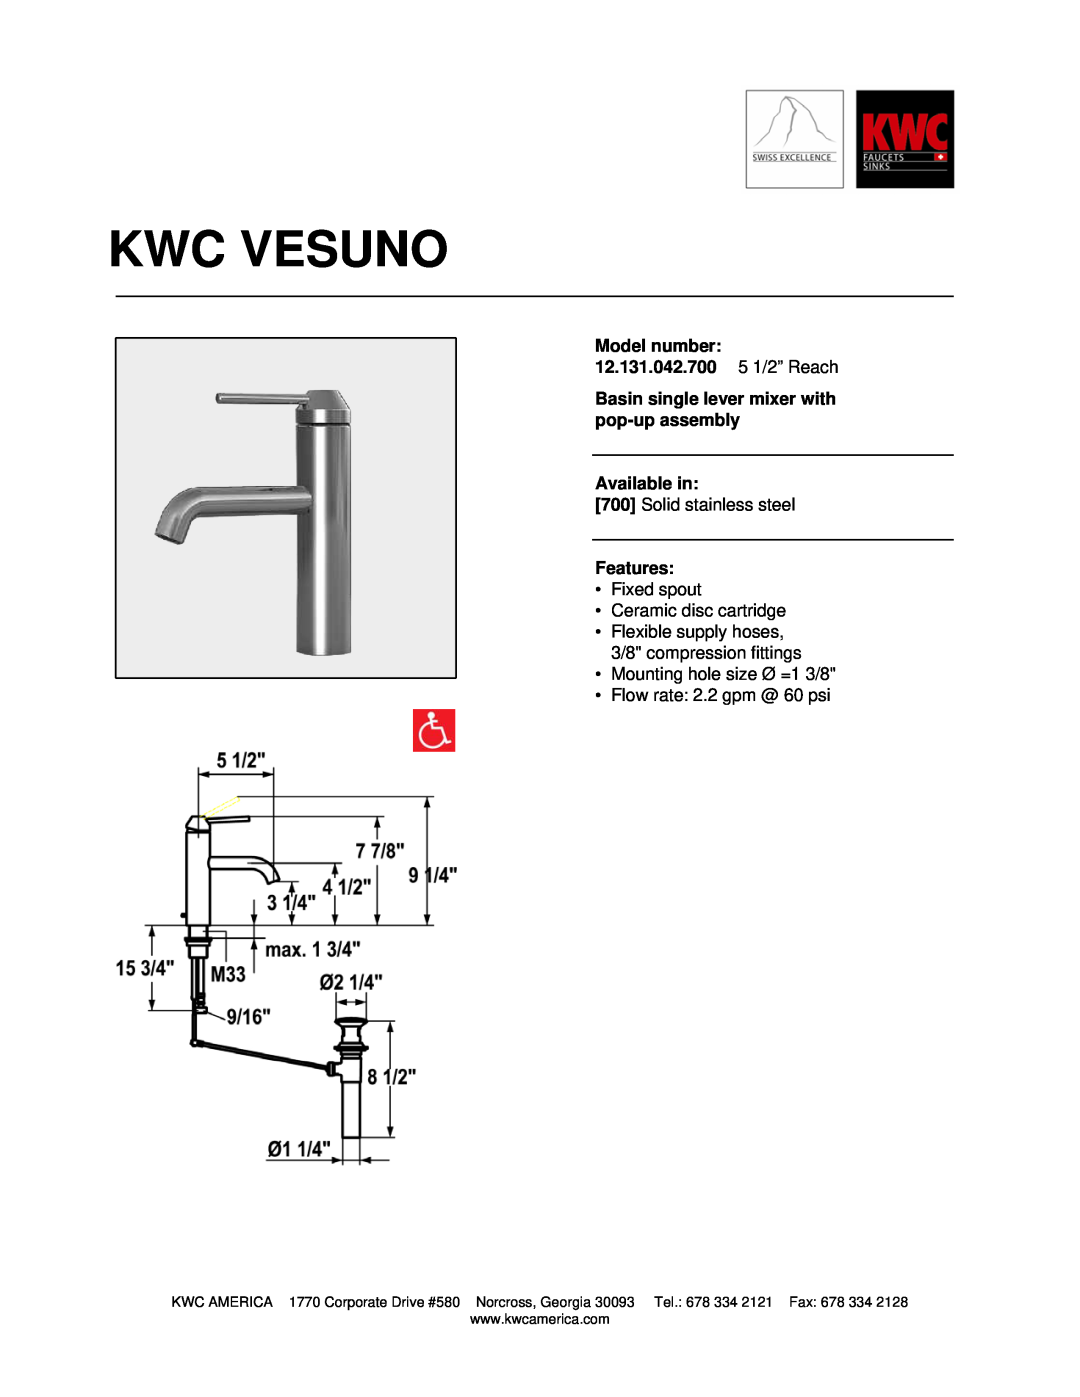 KWC manual Kwc Vesuno, Model number 12.131.042.700 5 1/2” Reach, Basin single lever mixer with pop-upassembly, Features 